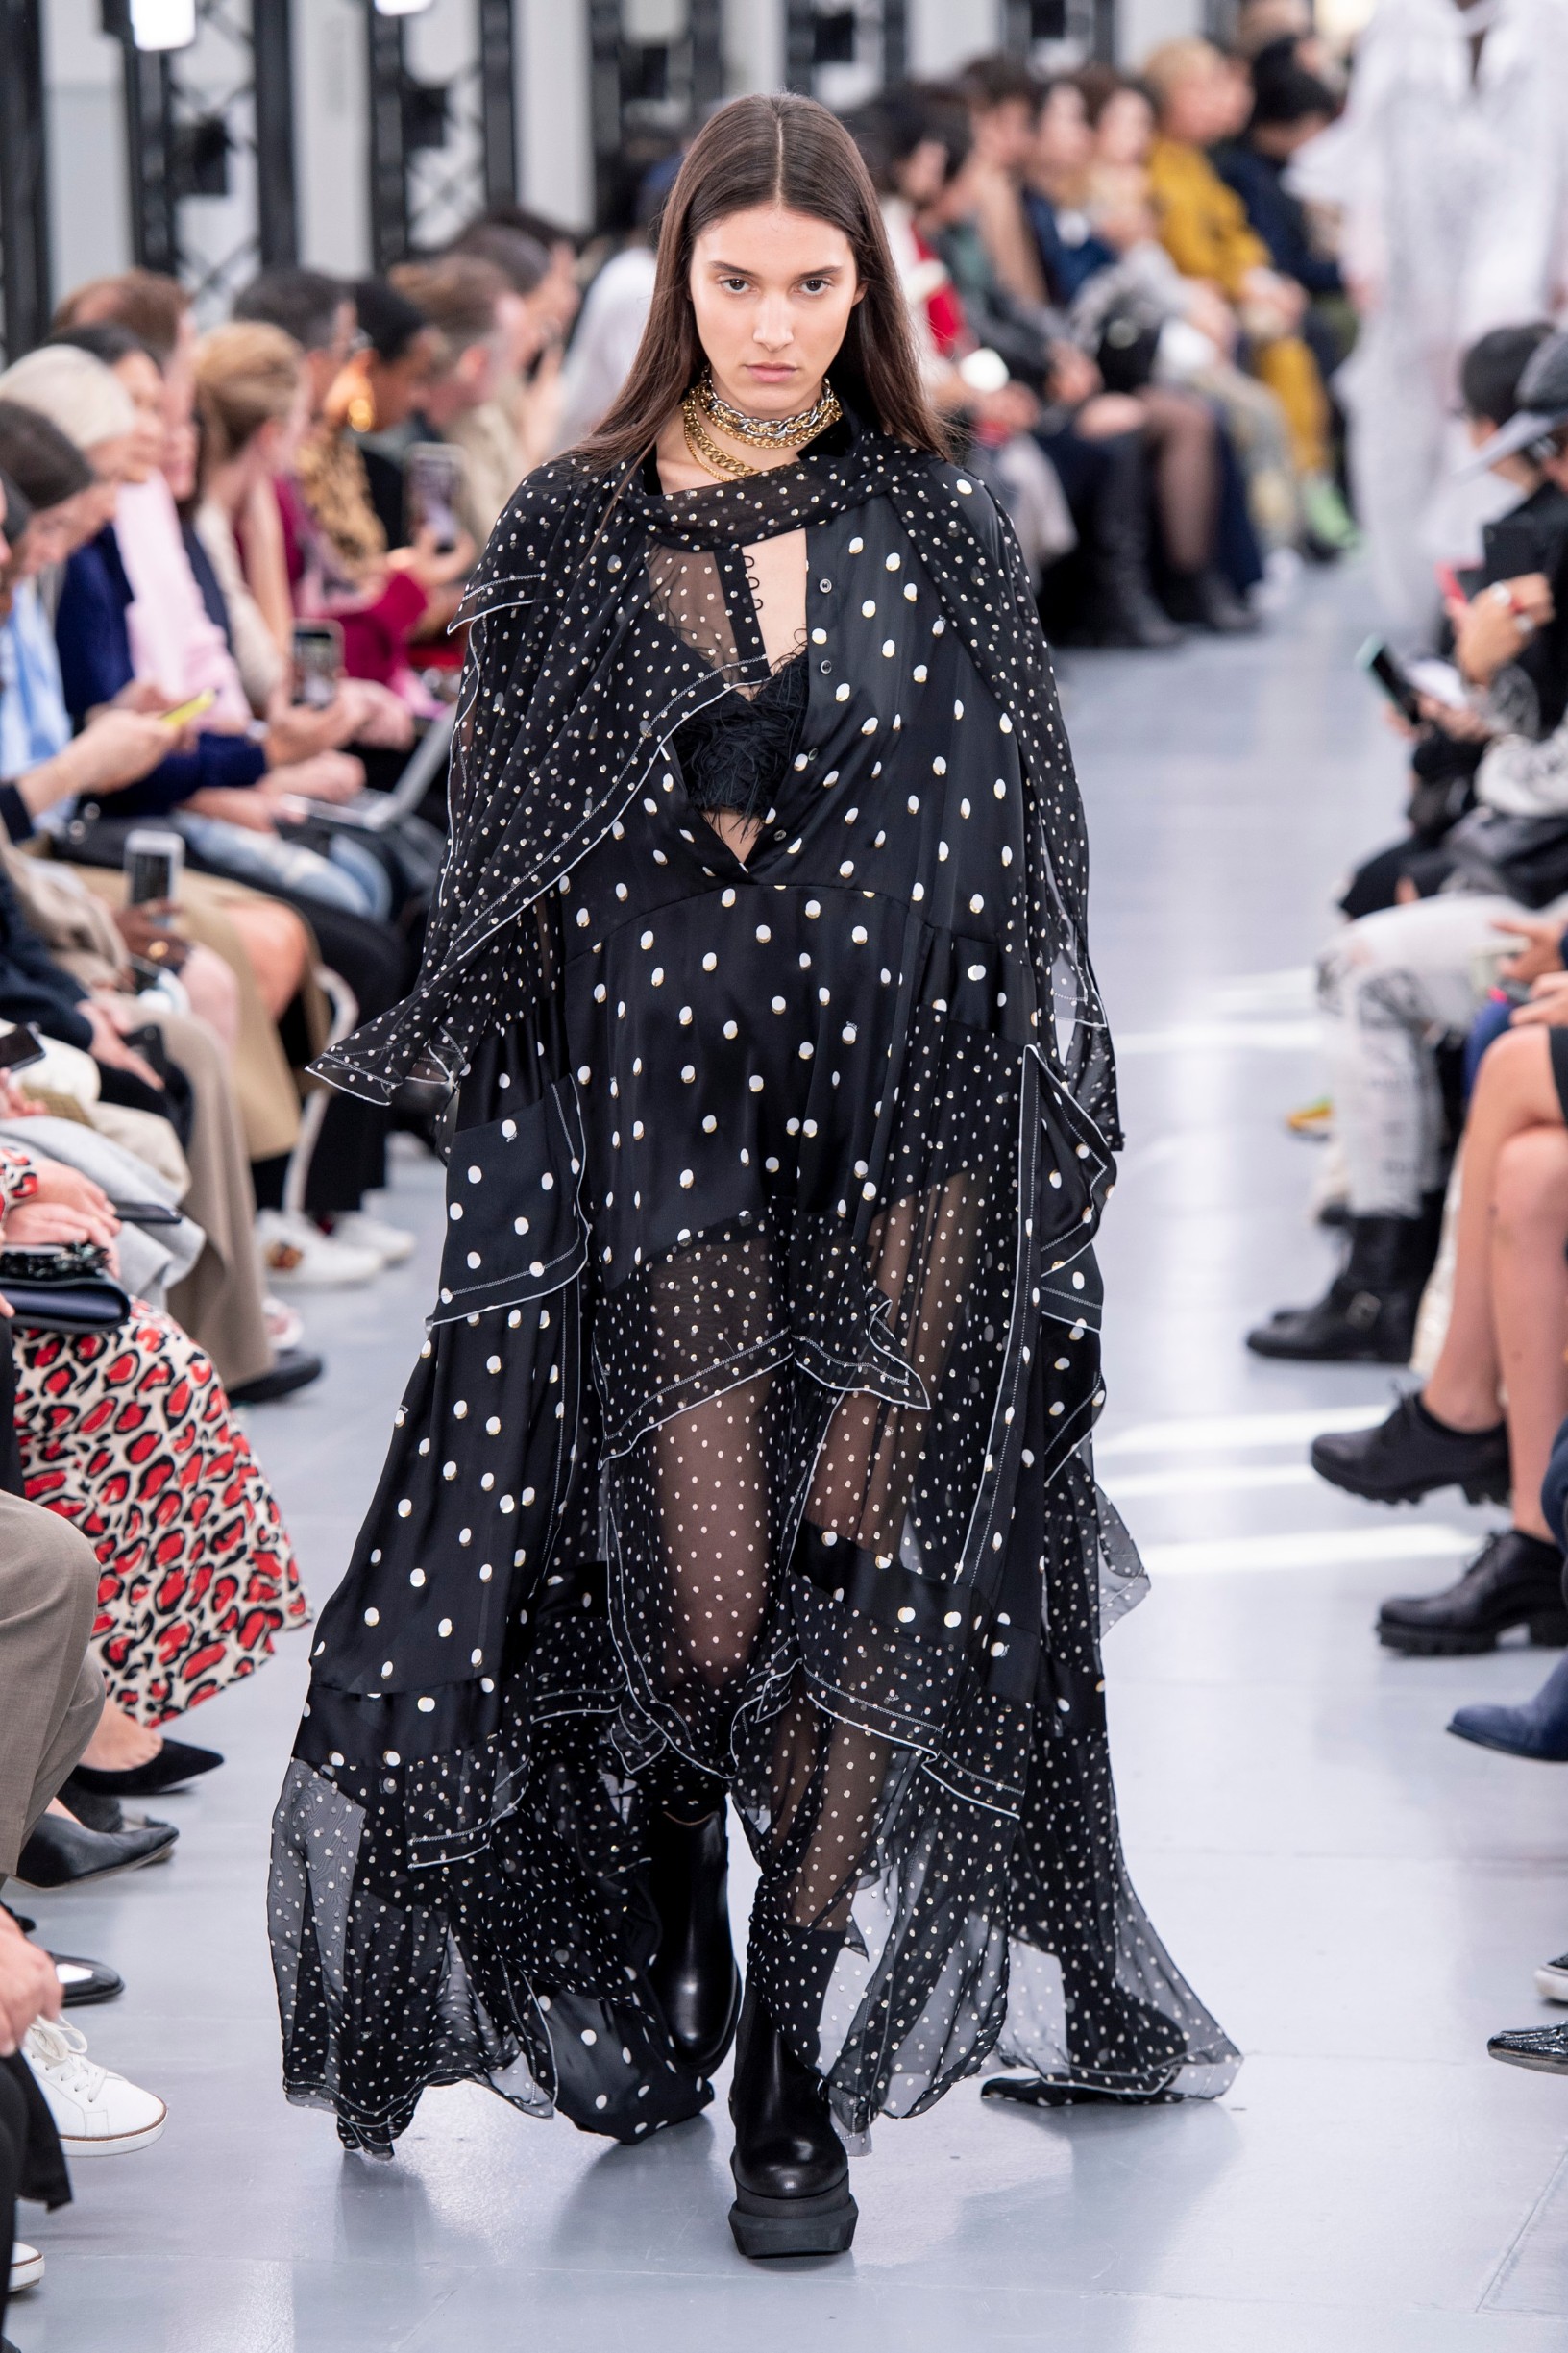 Sacai
catwalk fashion show at Paris Fashion Week SS20, in
Paris, France, September 2019, Image: 474790205, License: Rights-managed, Restrictions: , Model Release: no, Credit line: Rick Gold / Capital pictures / Profimedia